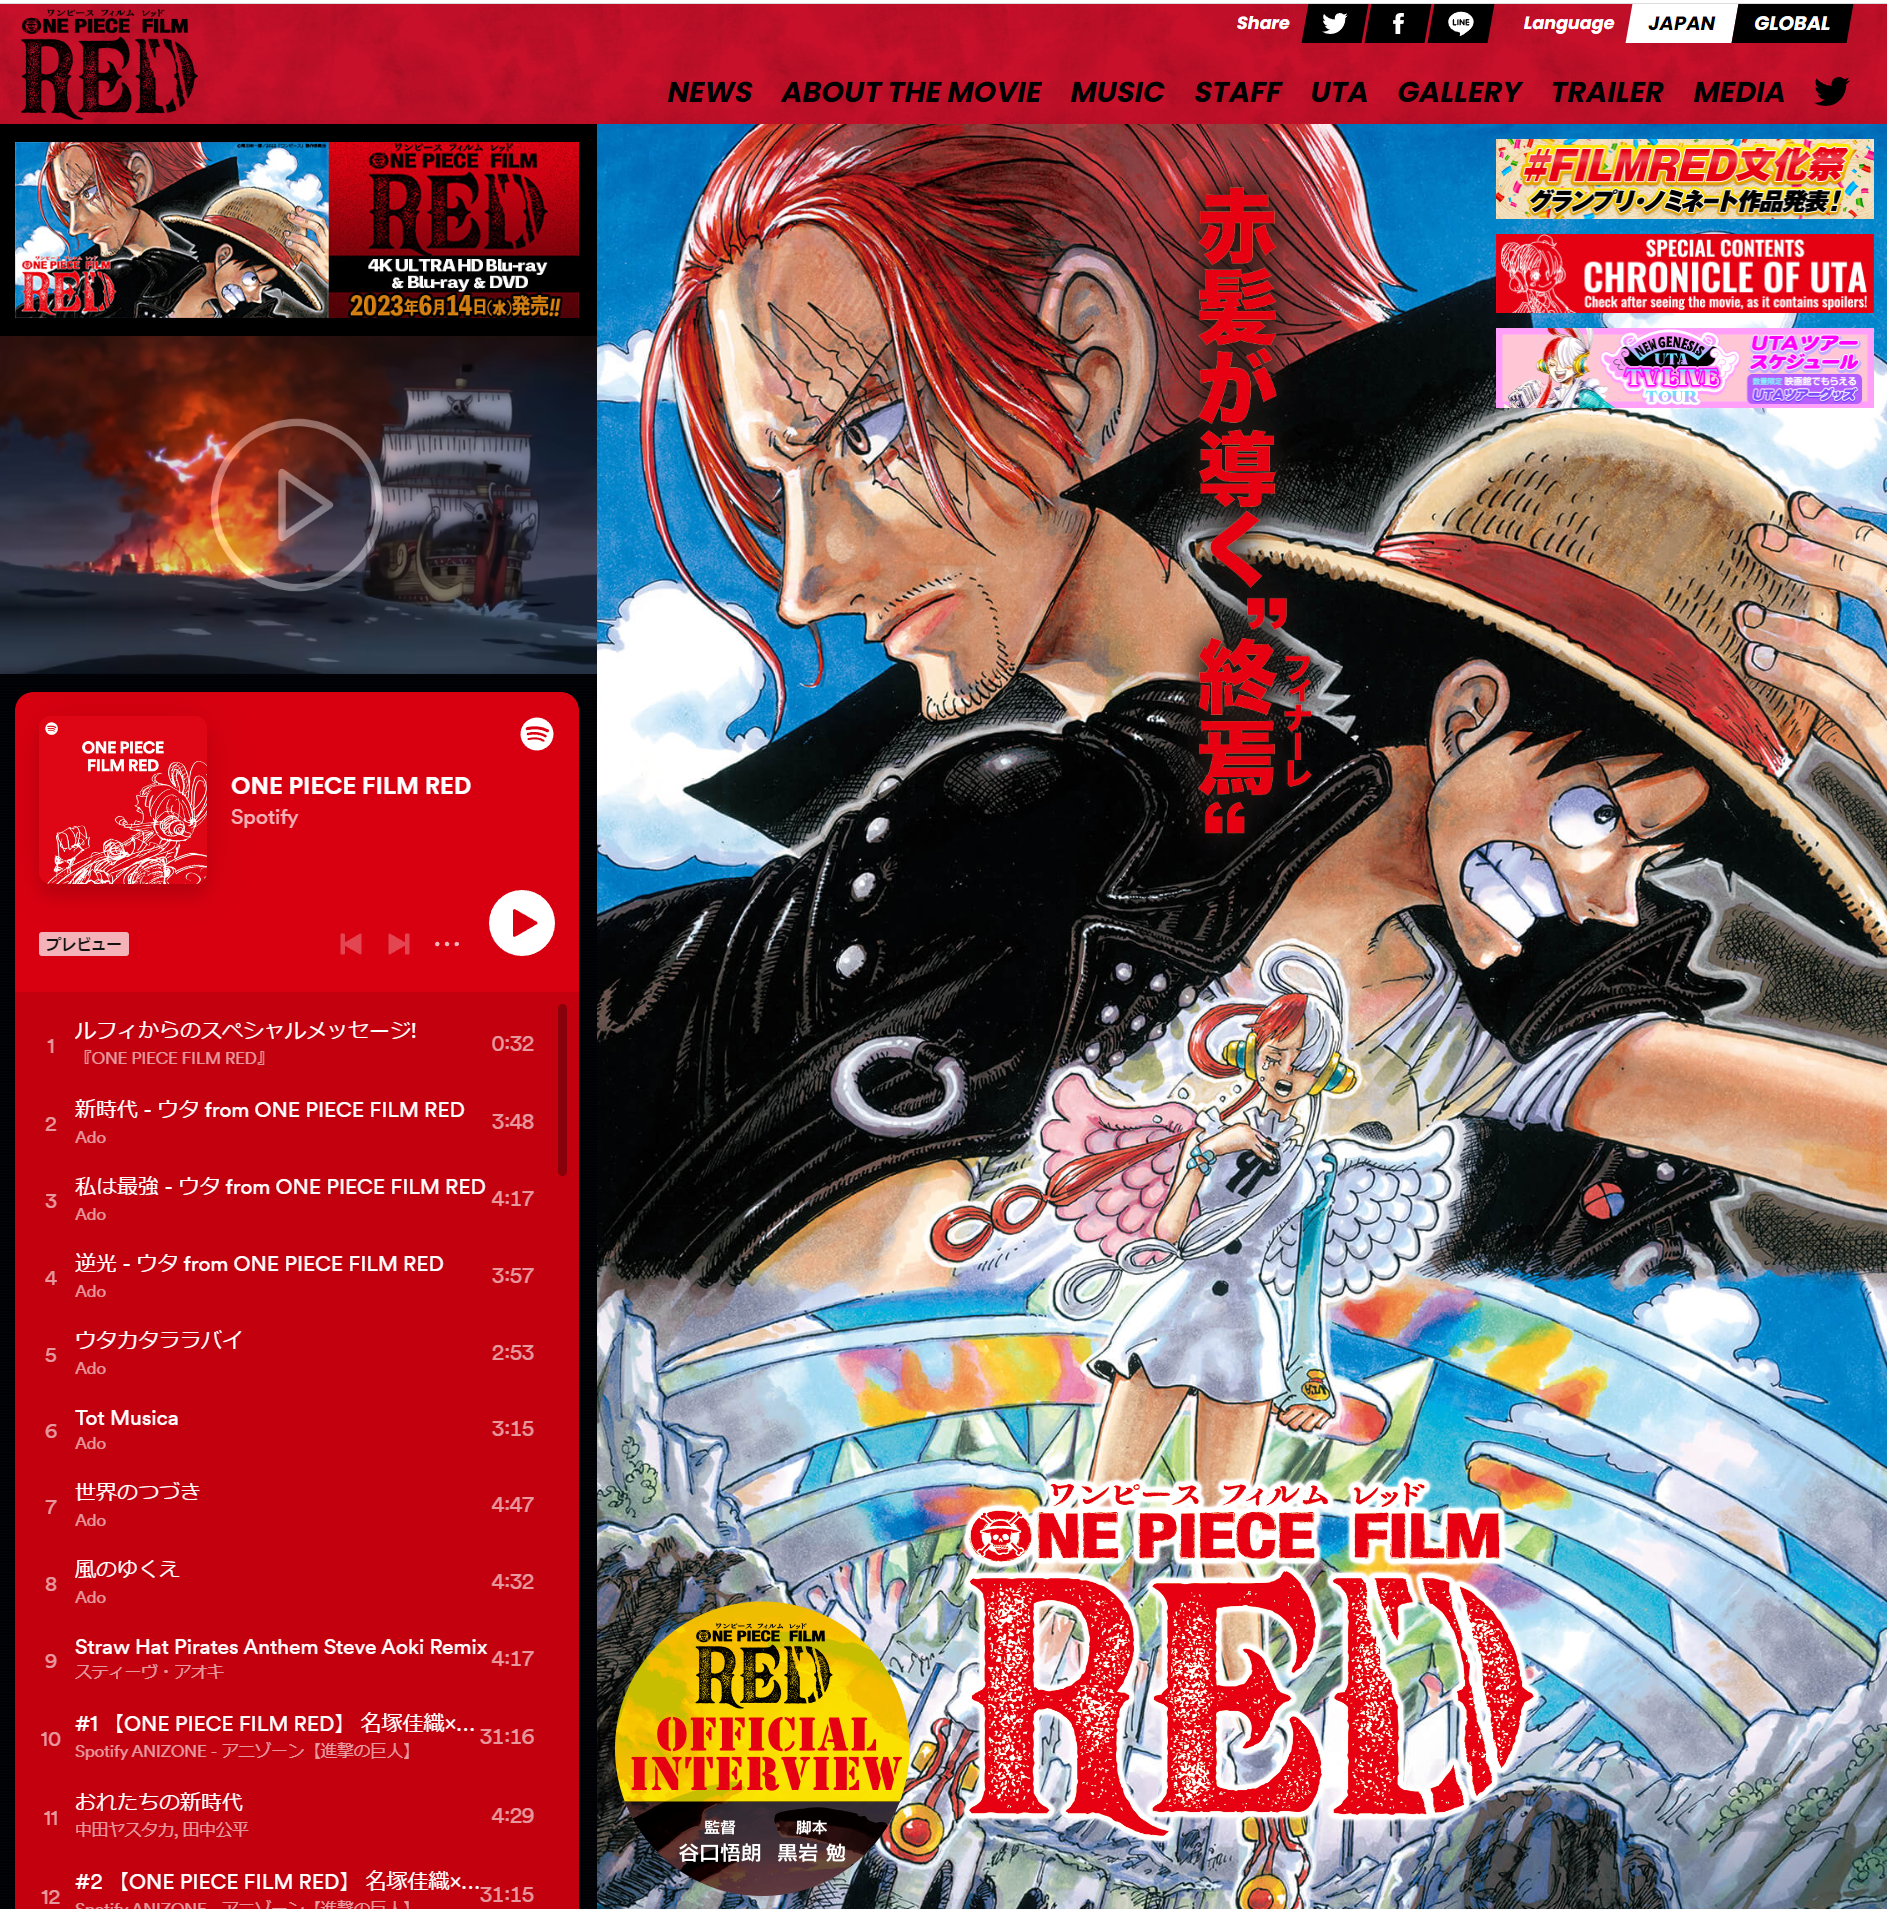 one piece film red_top